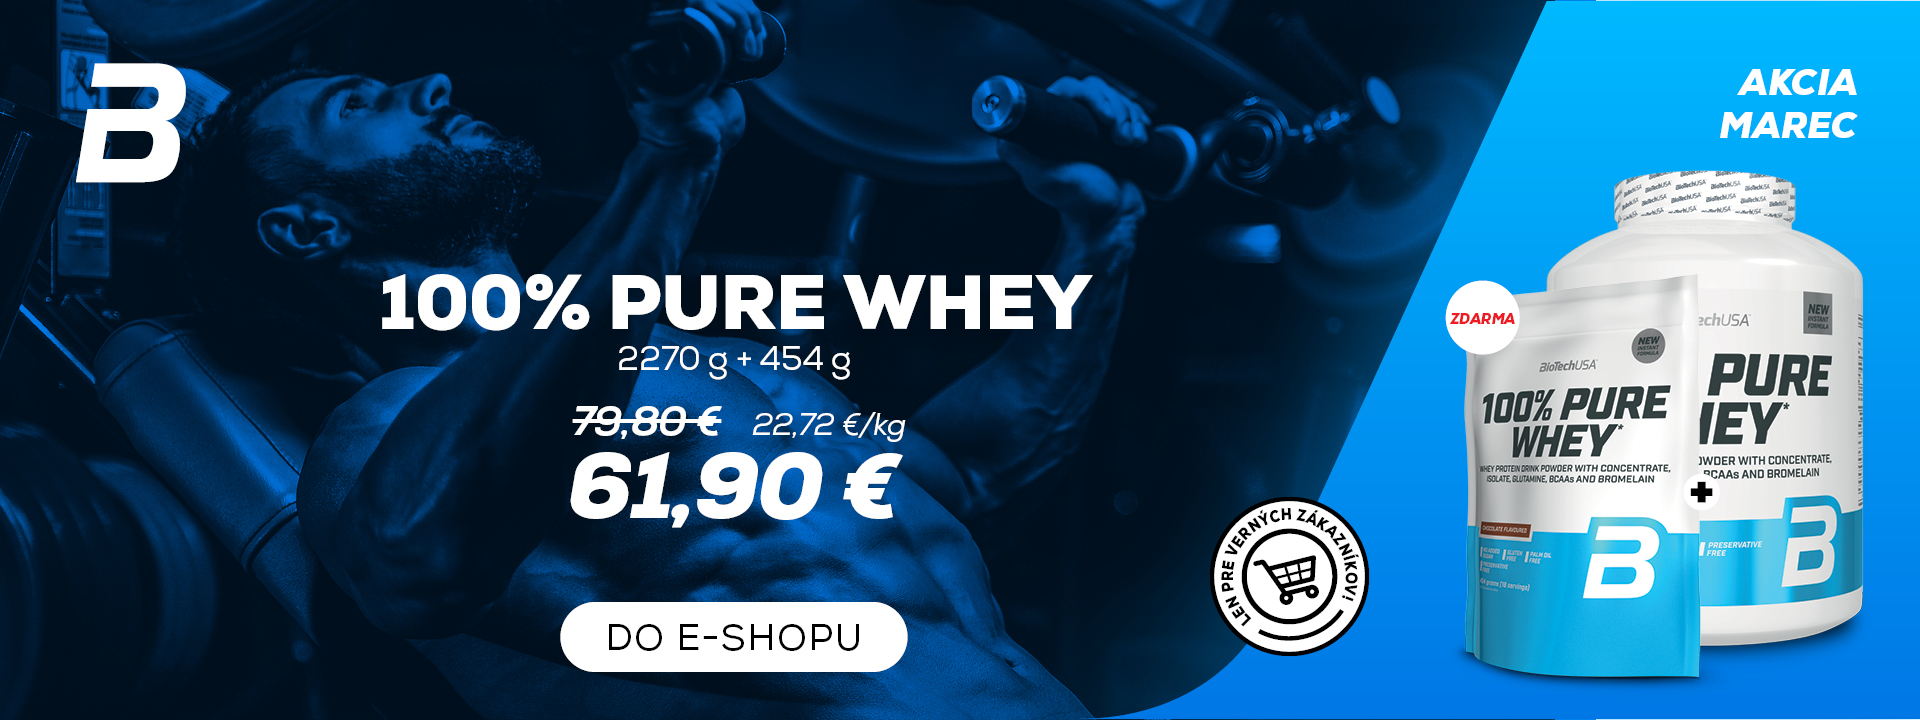 Március - 100% Pure Whey 2270g  + 100% Pure Whey 454 g